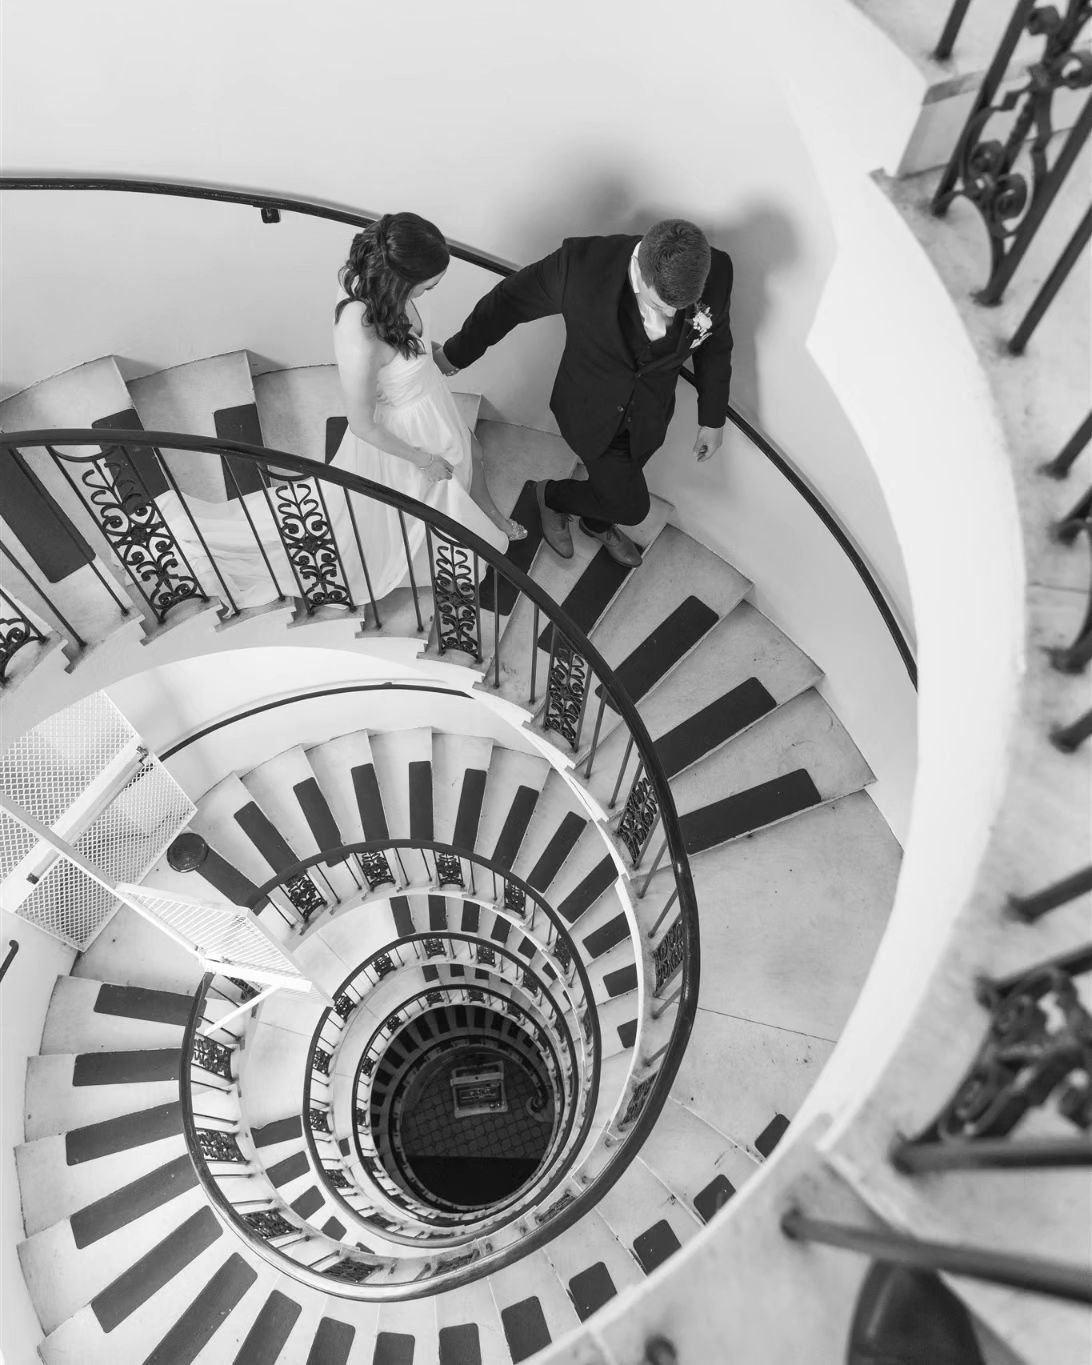 First look in the spiral stairwell. This is a wonderful and unexpected spot found at The Hampshire House in Boston, MA. 

#weddingphotographer #bostonwedding #bostonweddingphotographer #citywedding #Boston #weddingphotos #weddingalbum